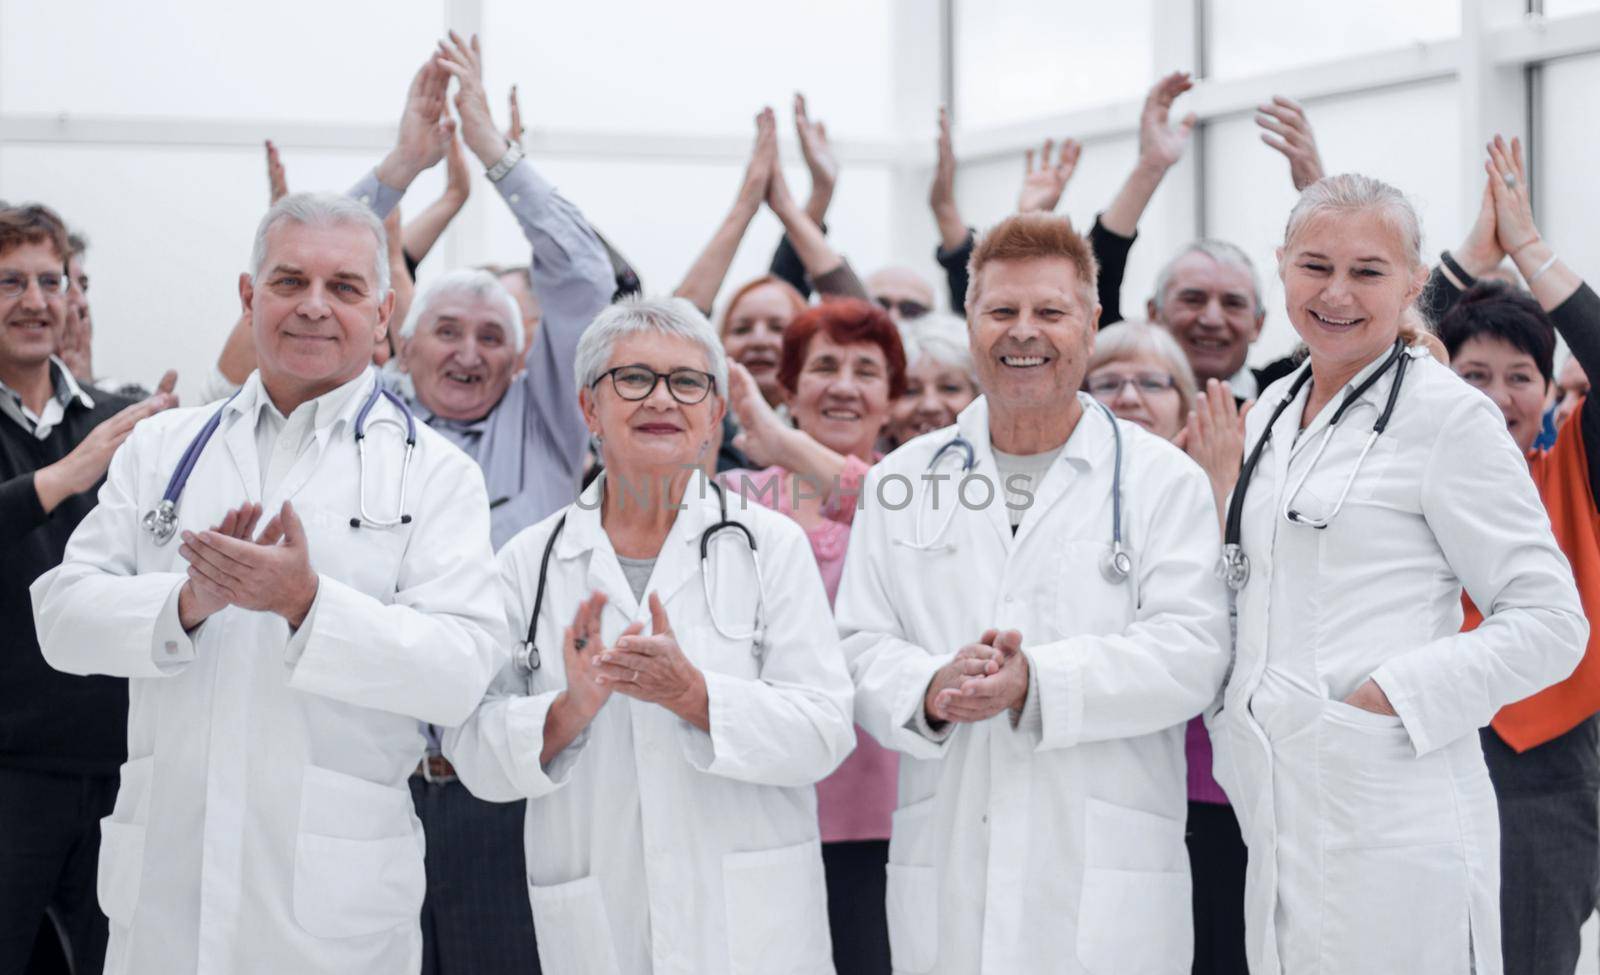 Group of the patients celebrate their recovery together with doctors